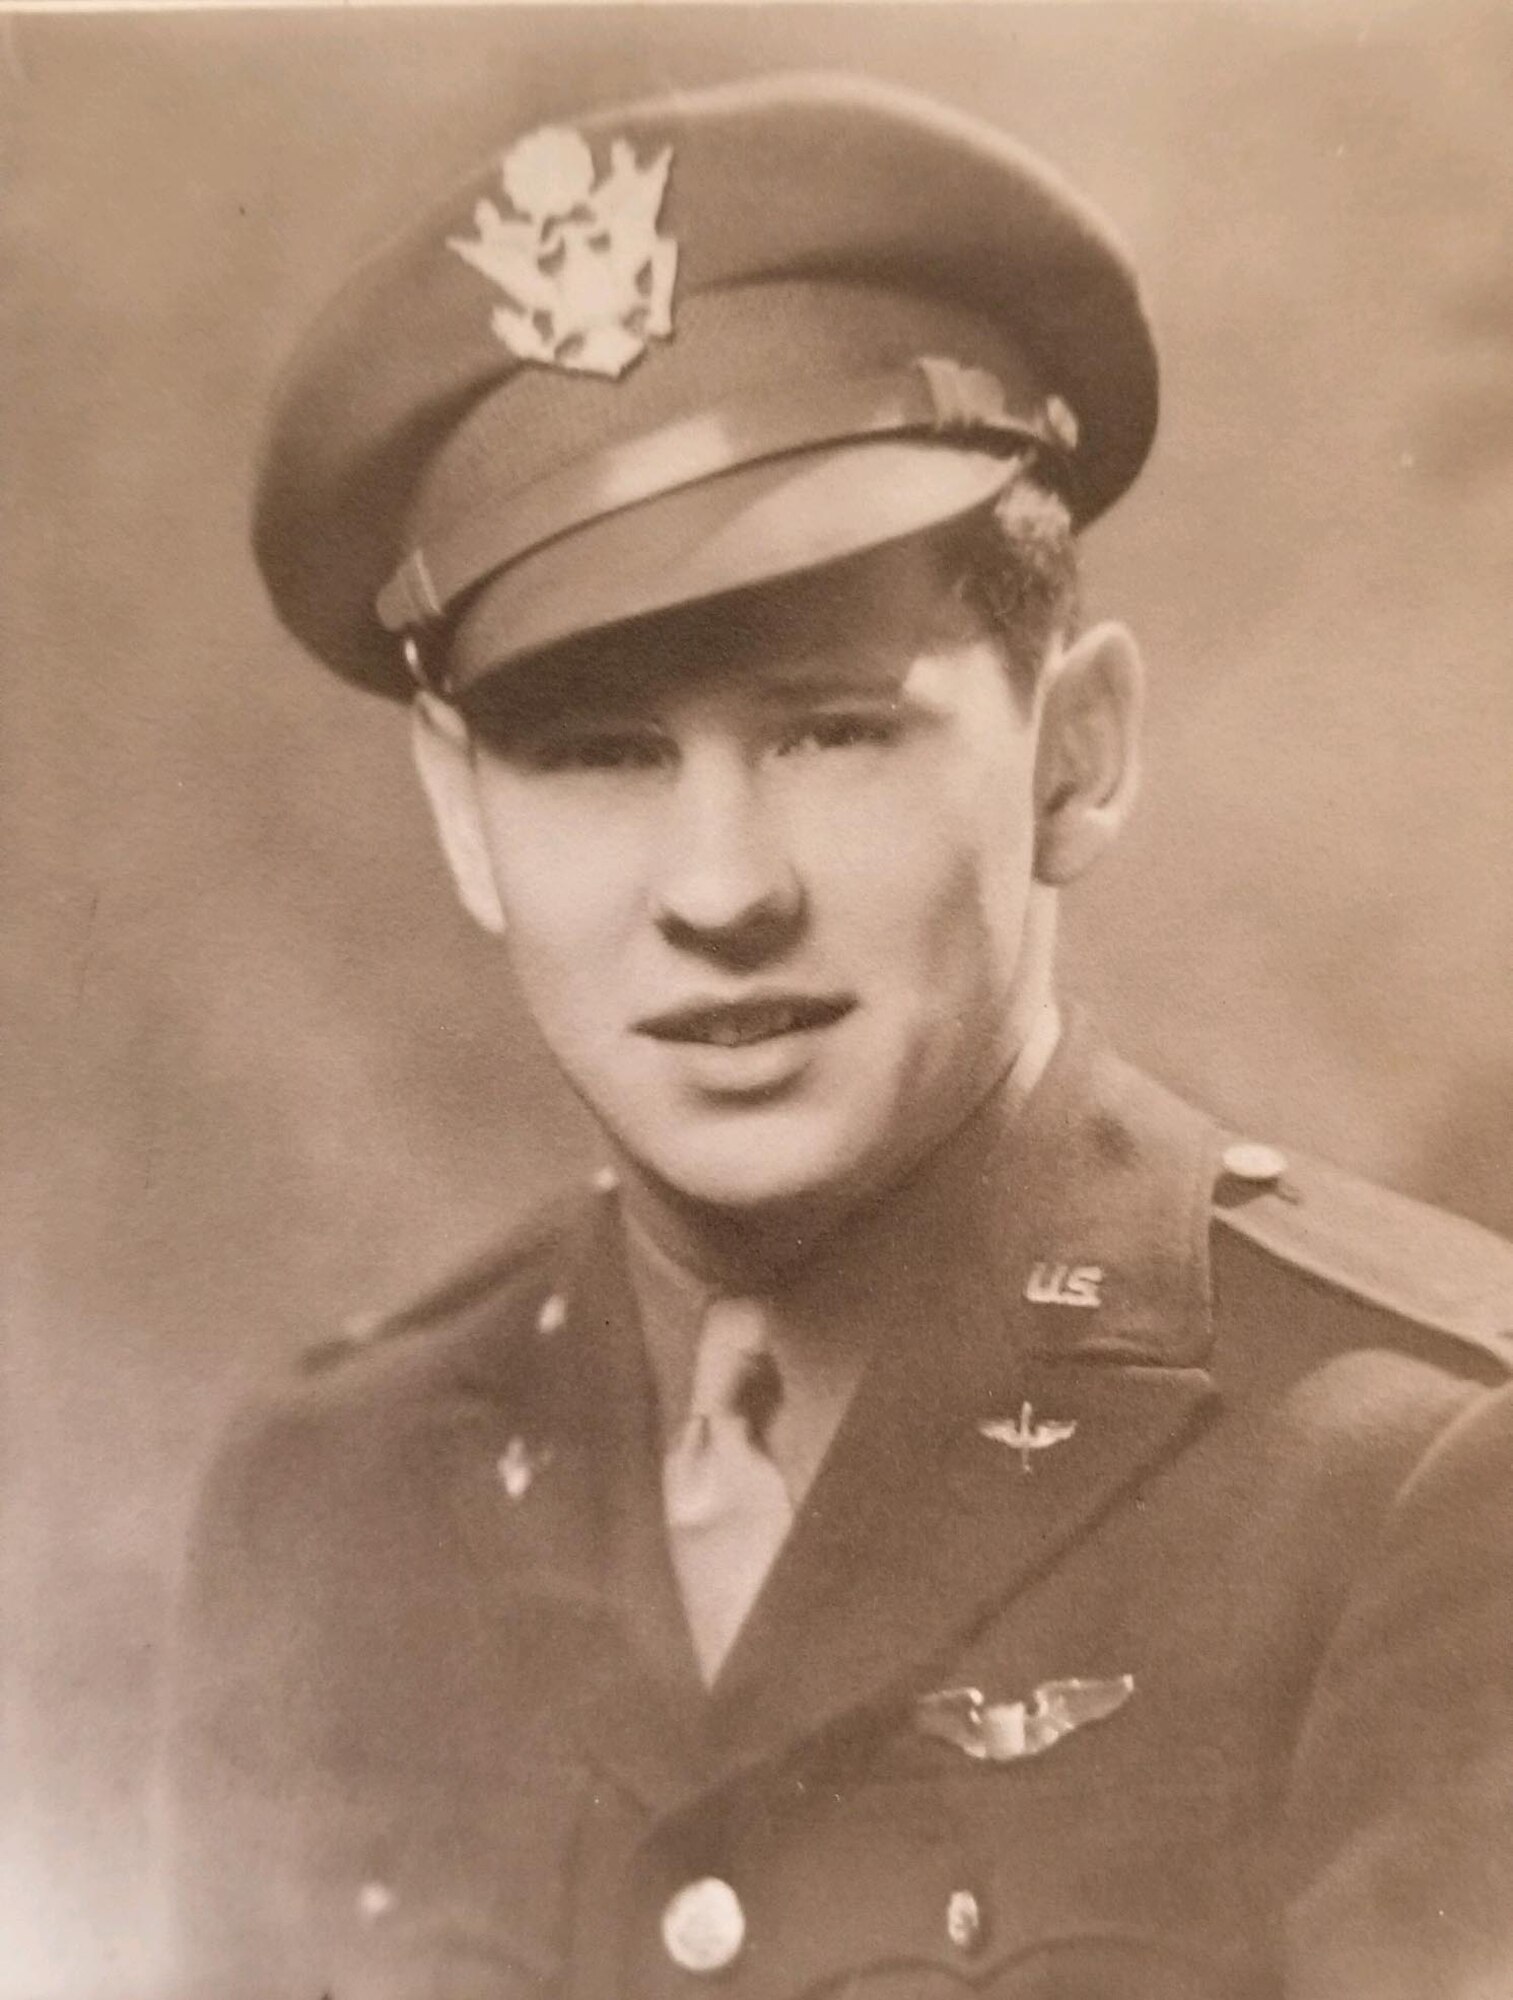 The remains of 2nd Lt. James R. Lord, former P-47 Thunderbolt pilot have been found and identified.